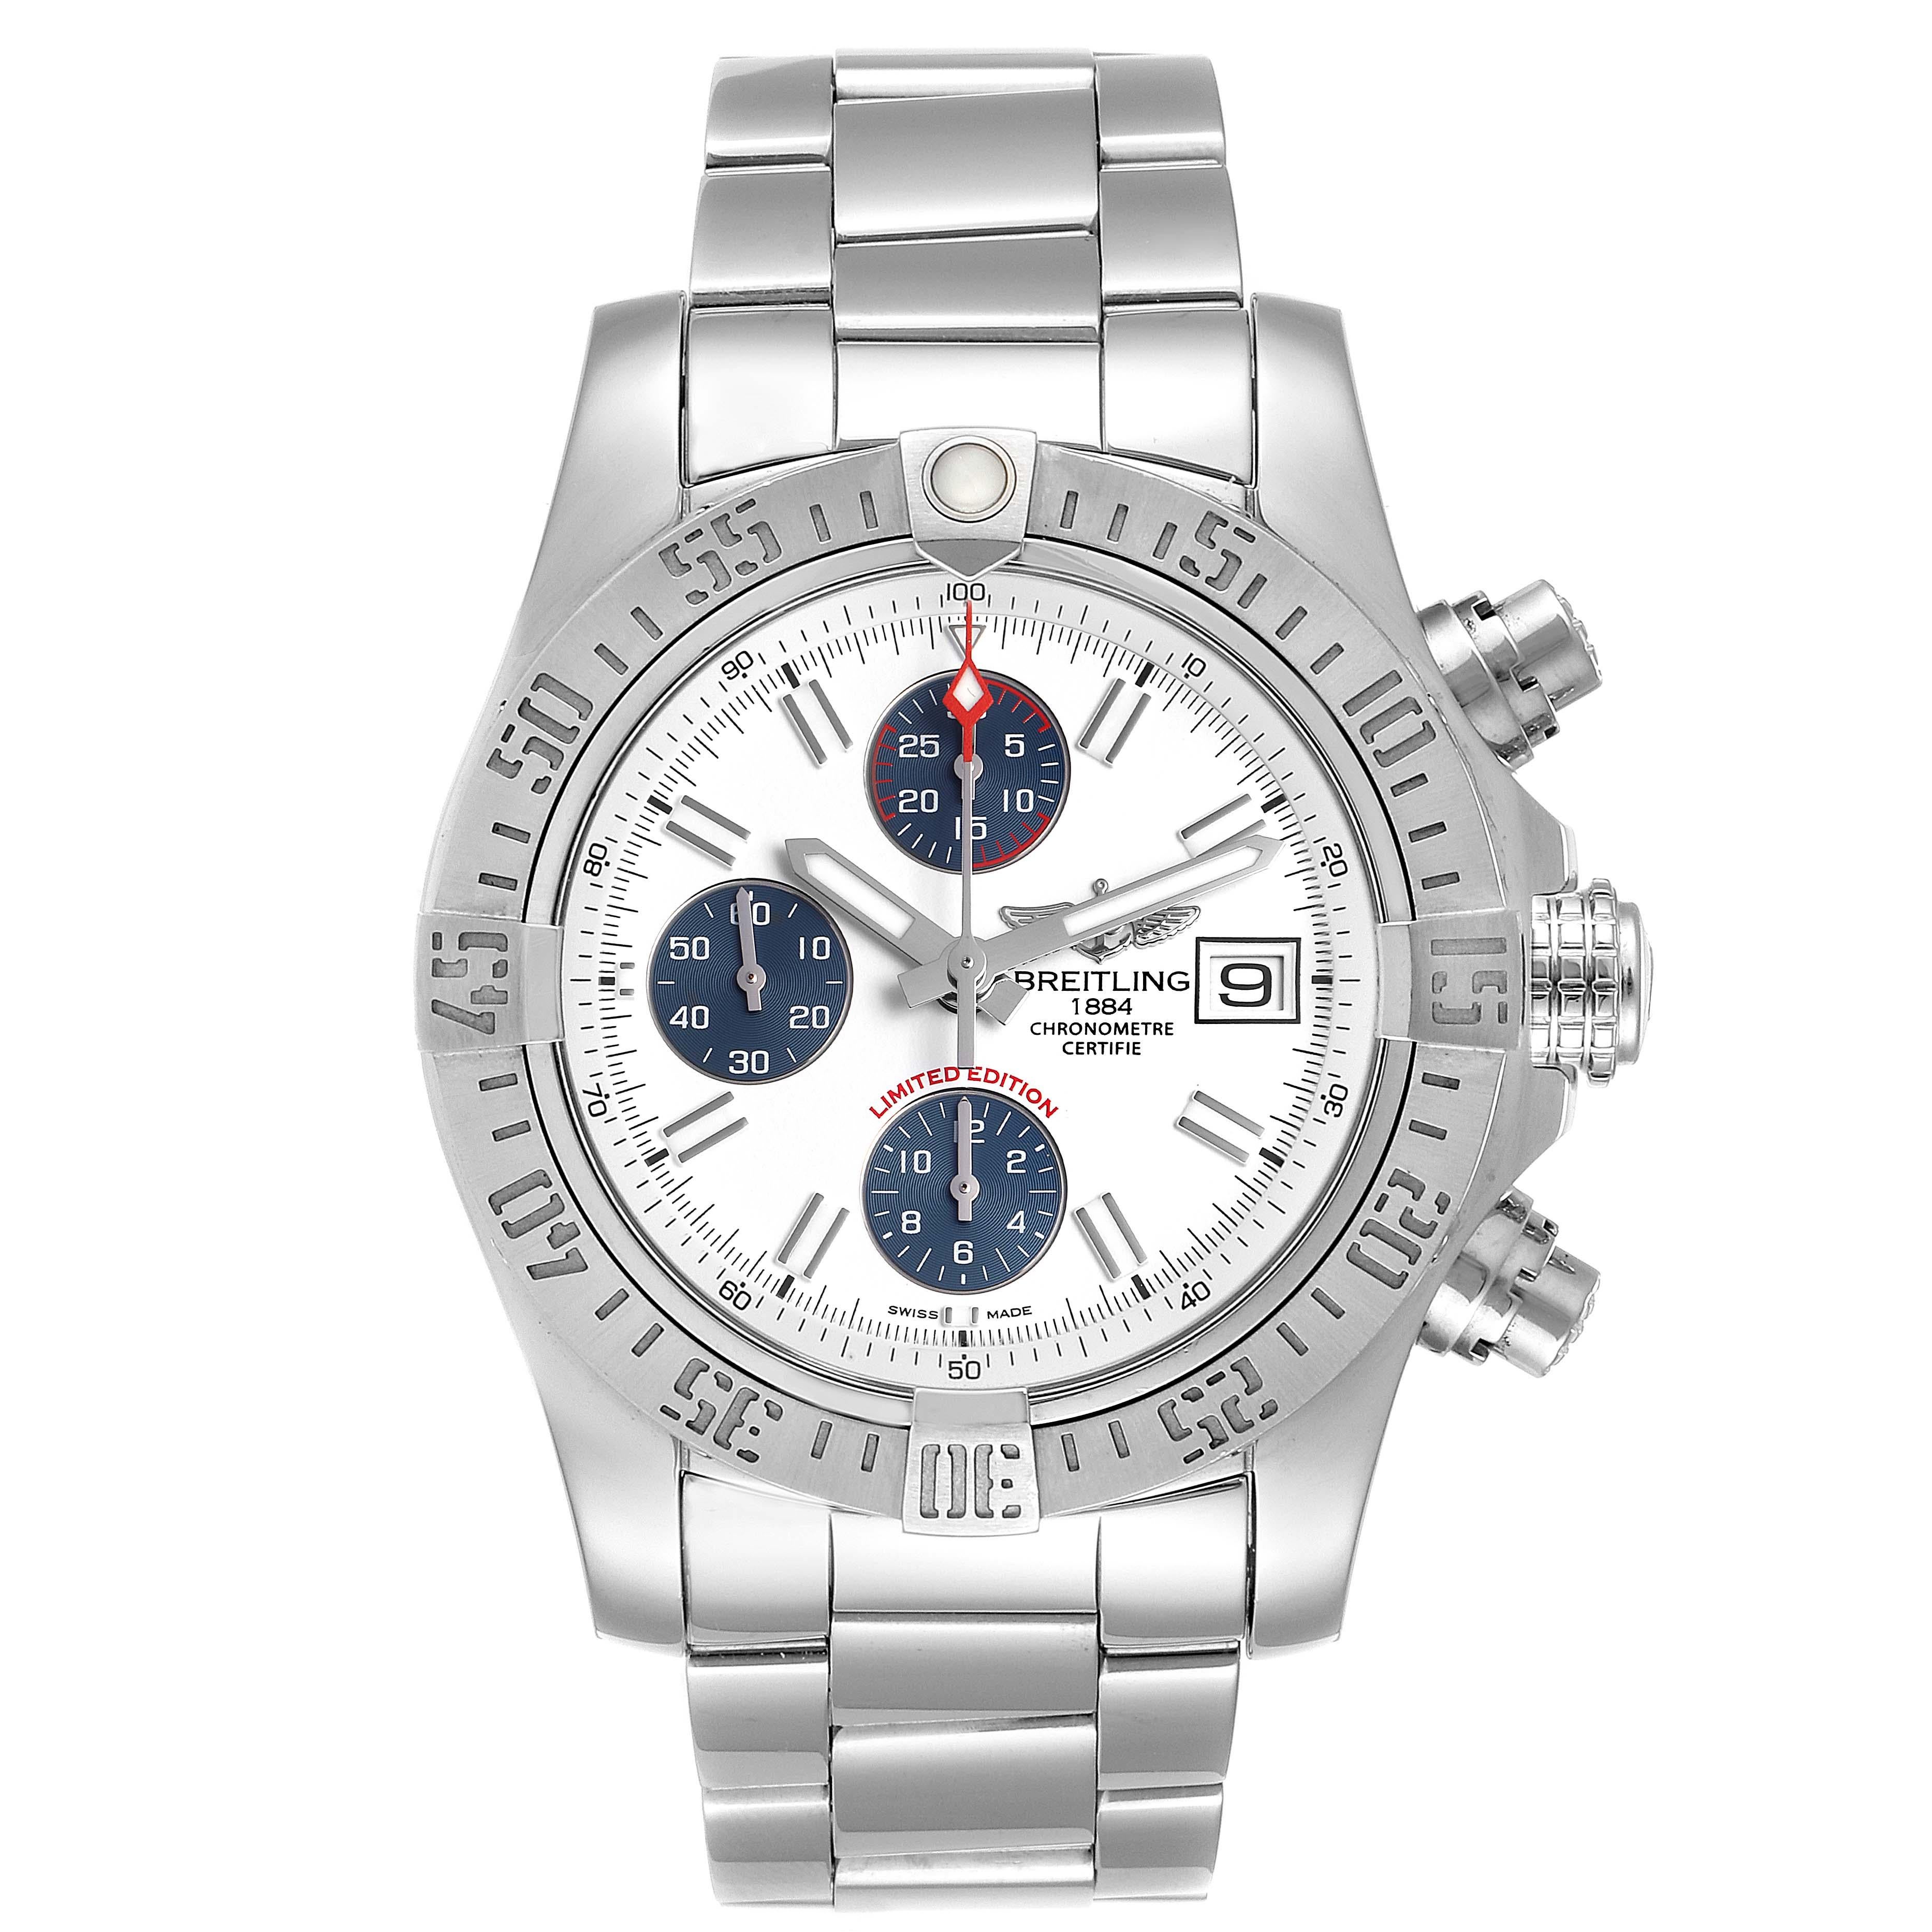 Breitling Aeromarine Super Avenger Mens Watch A13381. Automatic self-winding movement. Chronograph function. Stainless steel case 43 mm in diameter with screwed-down crown and pushers. Stainless steel unidirectional rotating bezel. 0-60